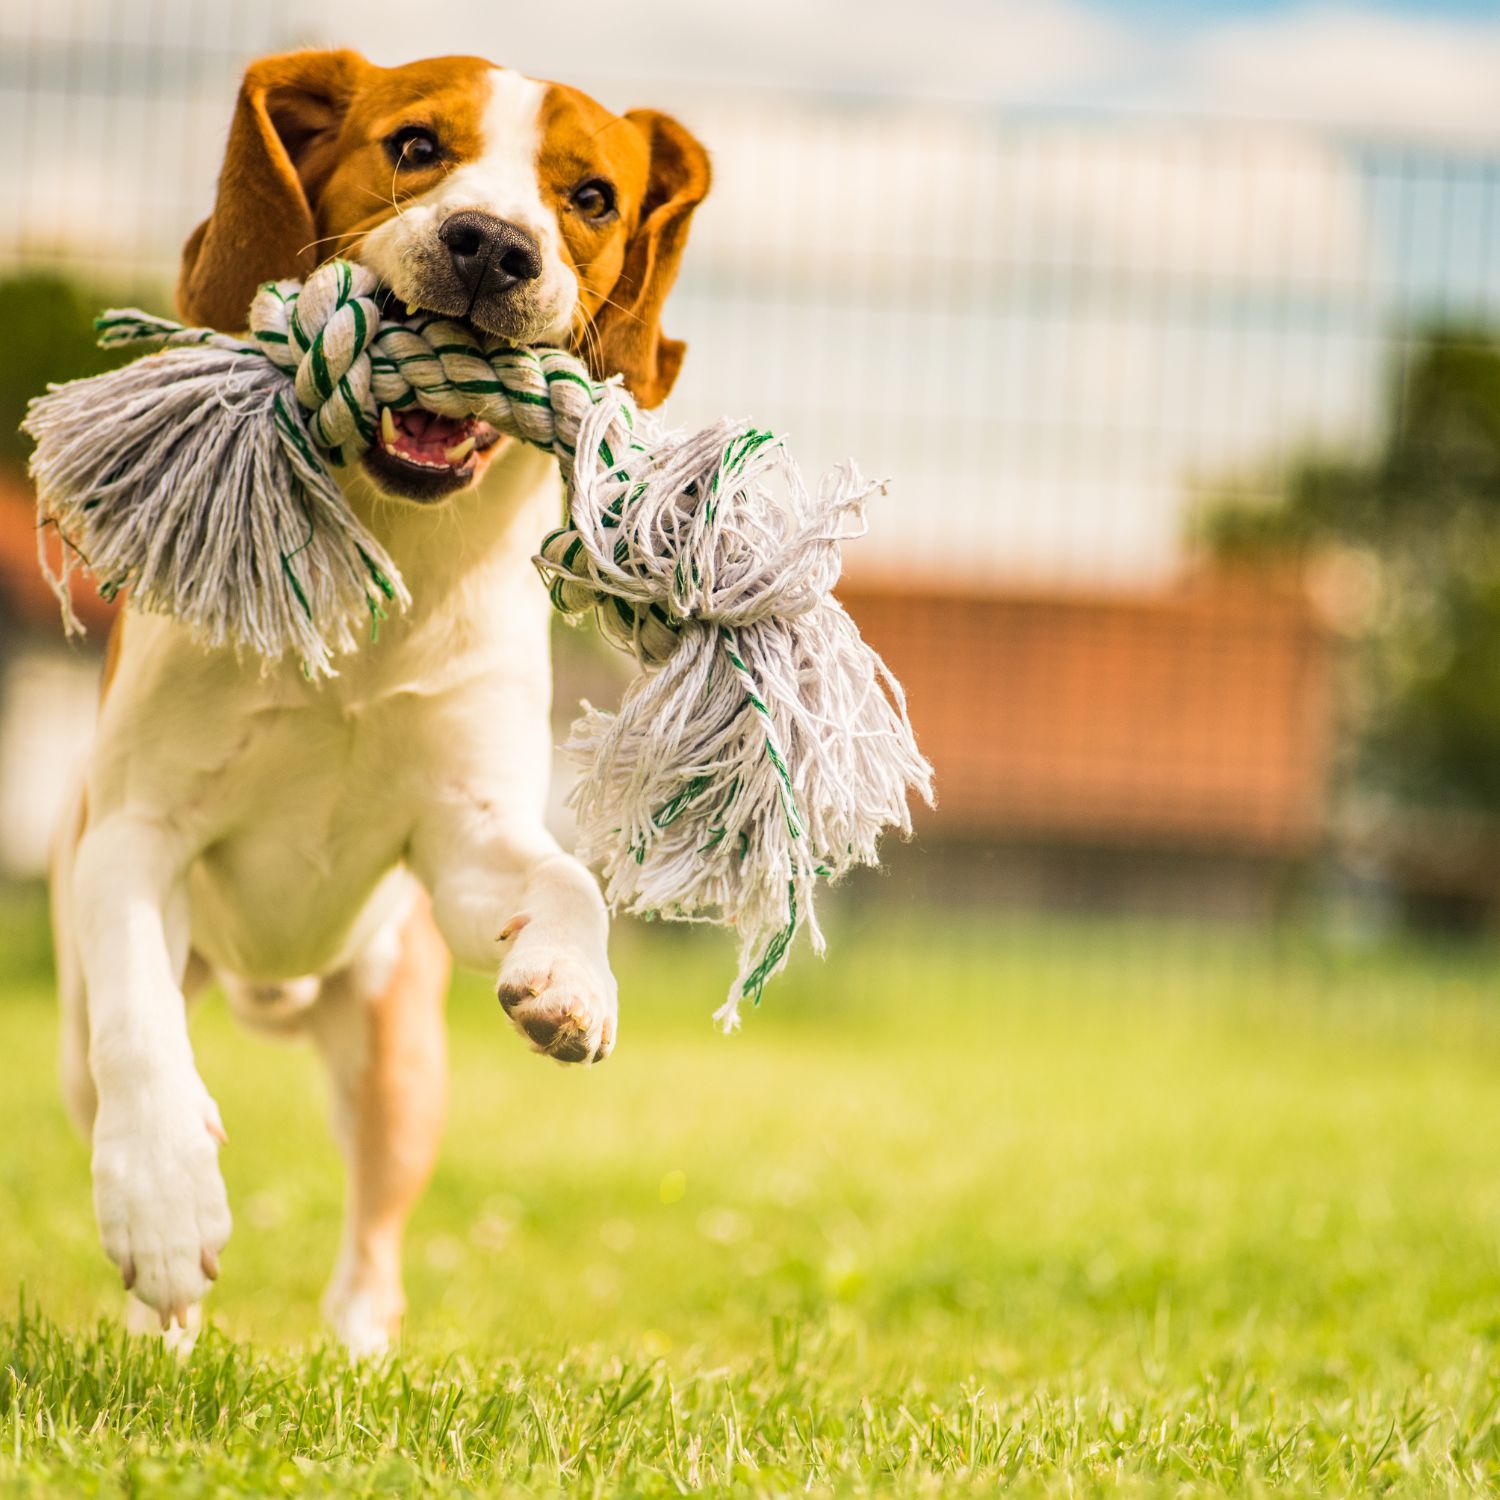 a dog running with a rope in its mouth